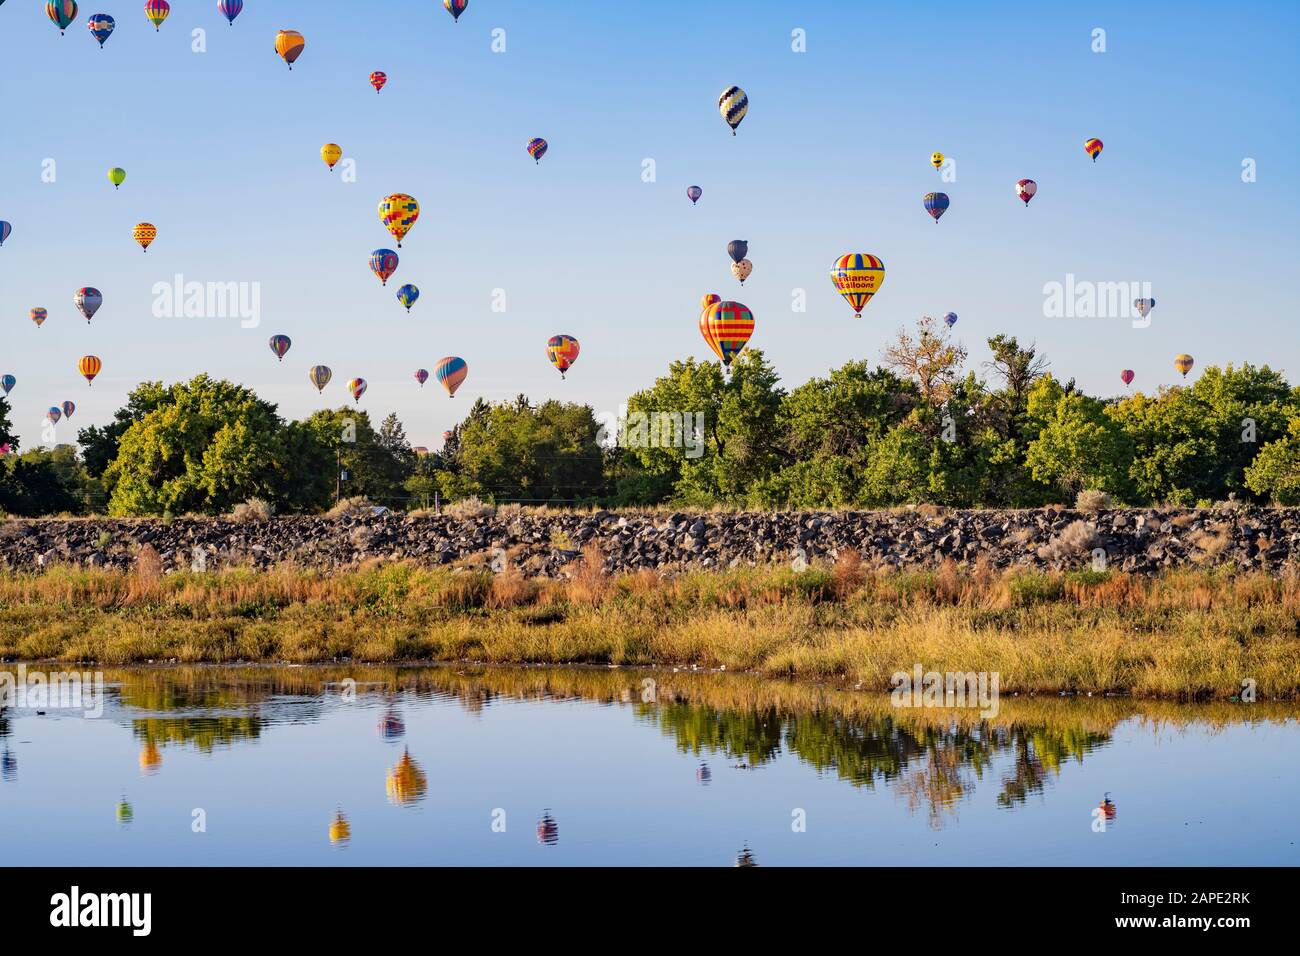 Morning view of the famous Albuquerque International Balloon Fiesta event at New Mexico Stock Photo